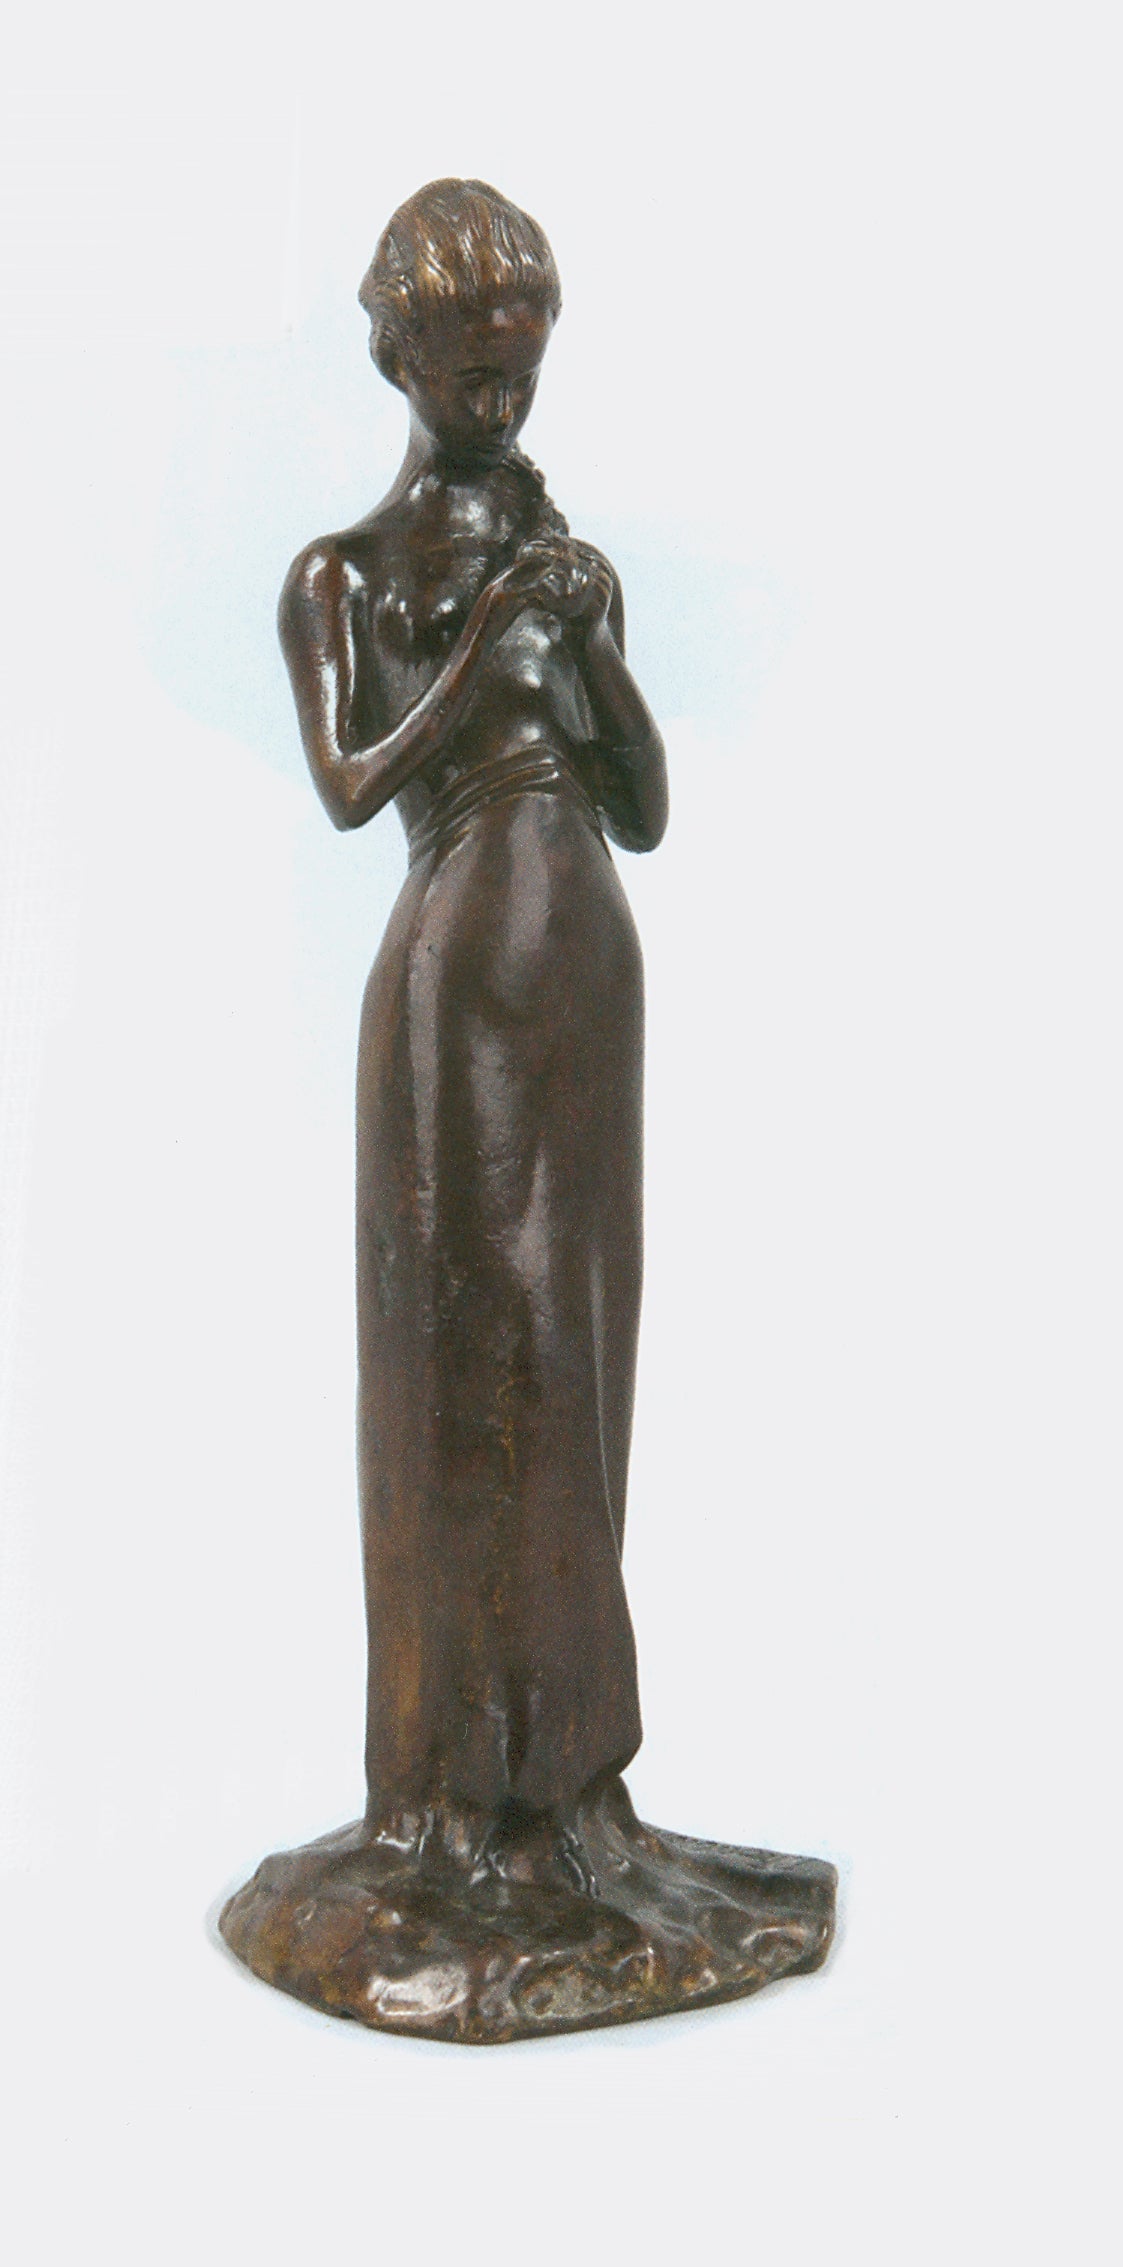 Prince Paul Troubetzkoy Figurative Sculpture - Bronze "A Girl Plaiting Her Hair" by Paolo Troubetzkoy